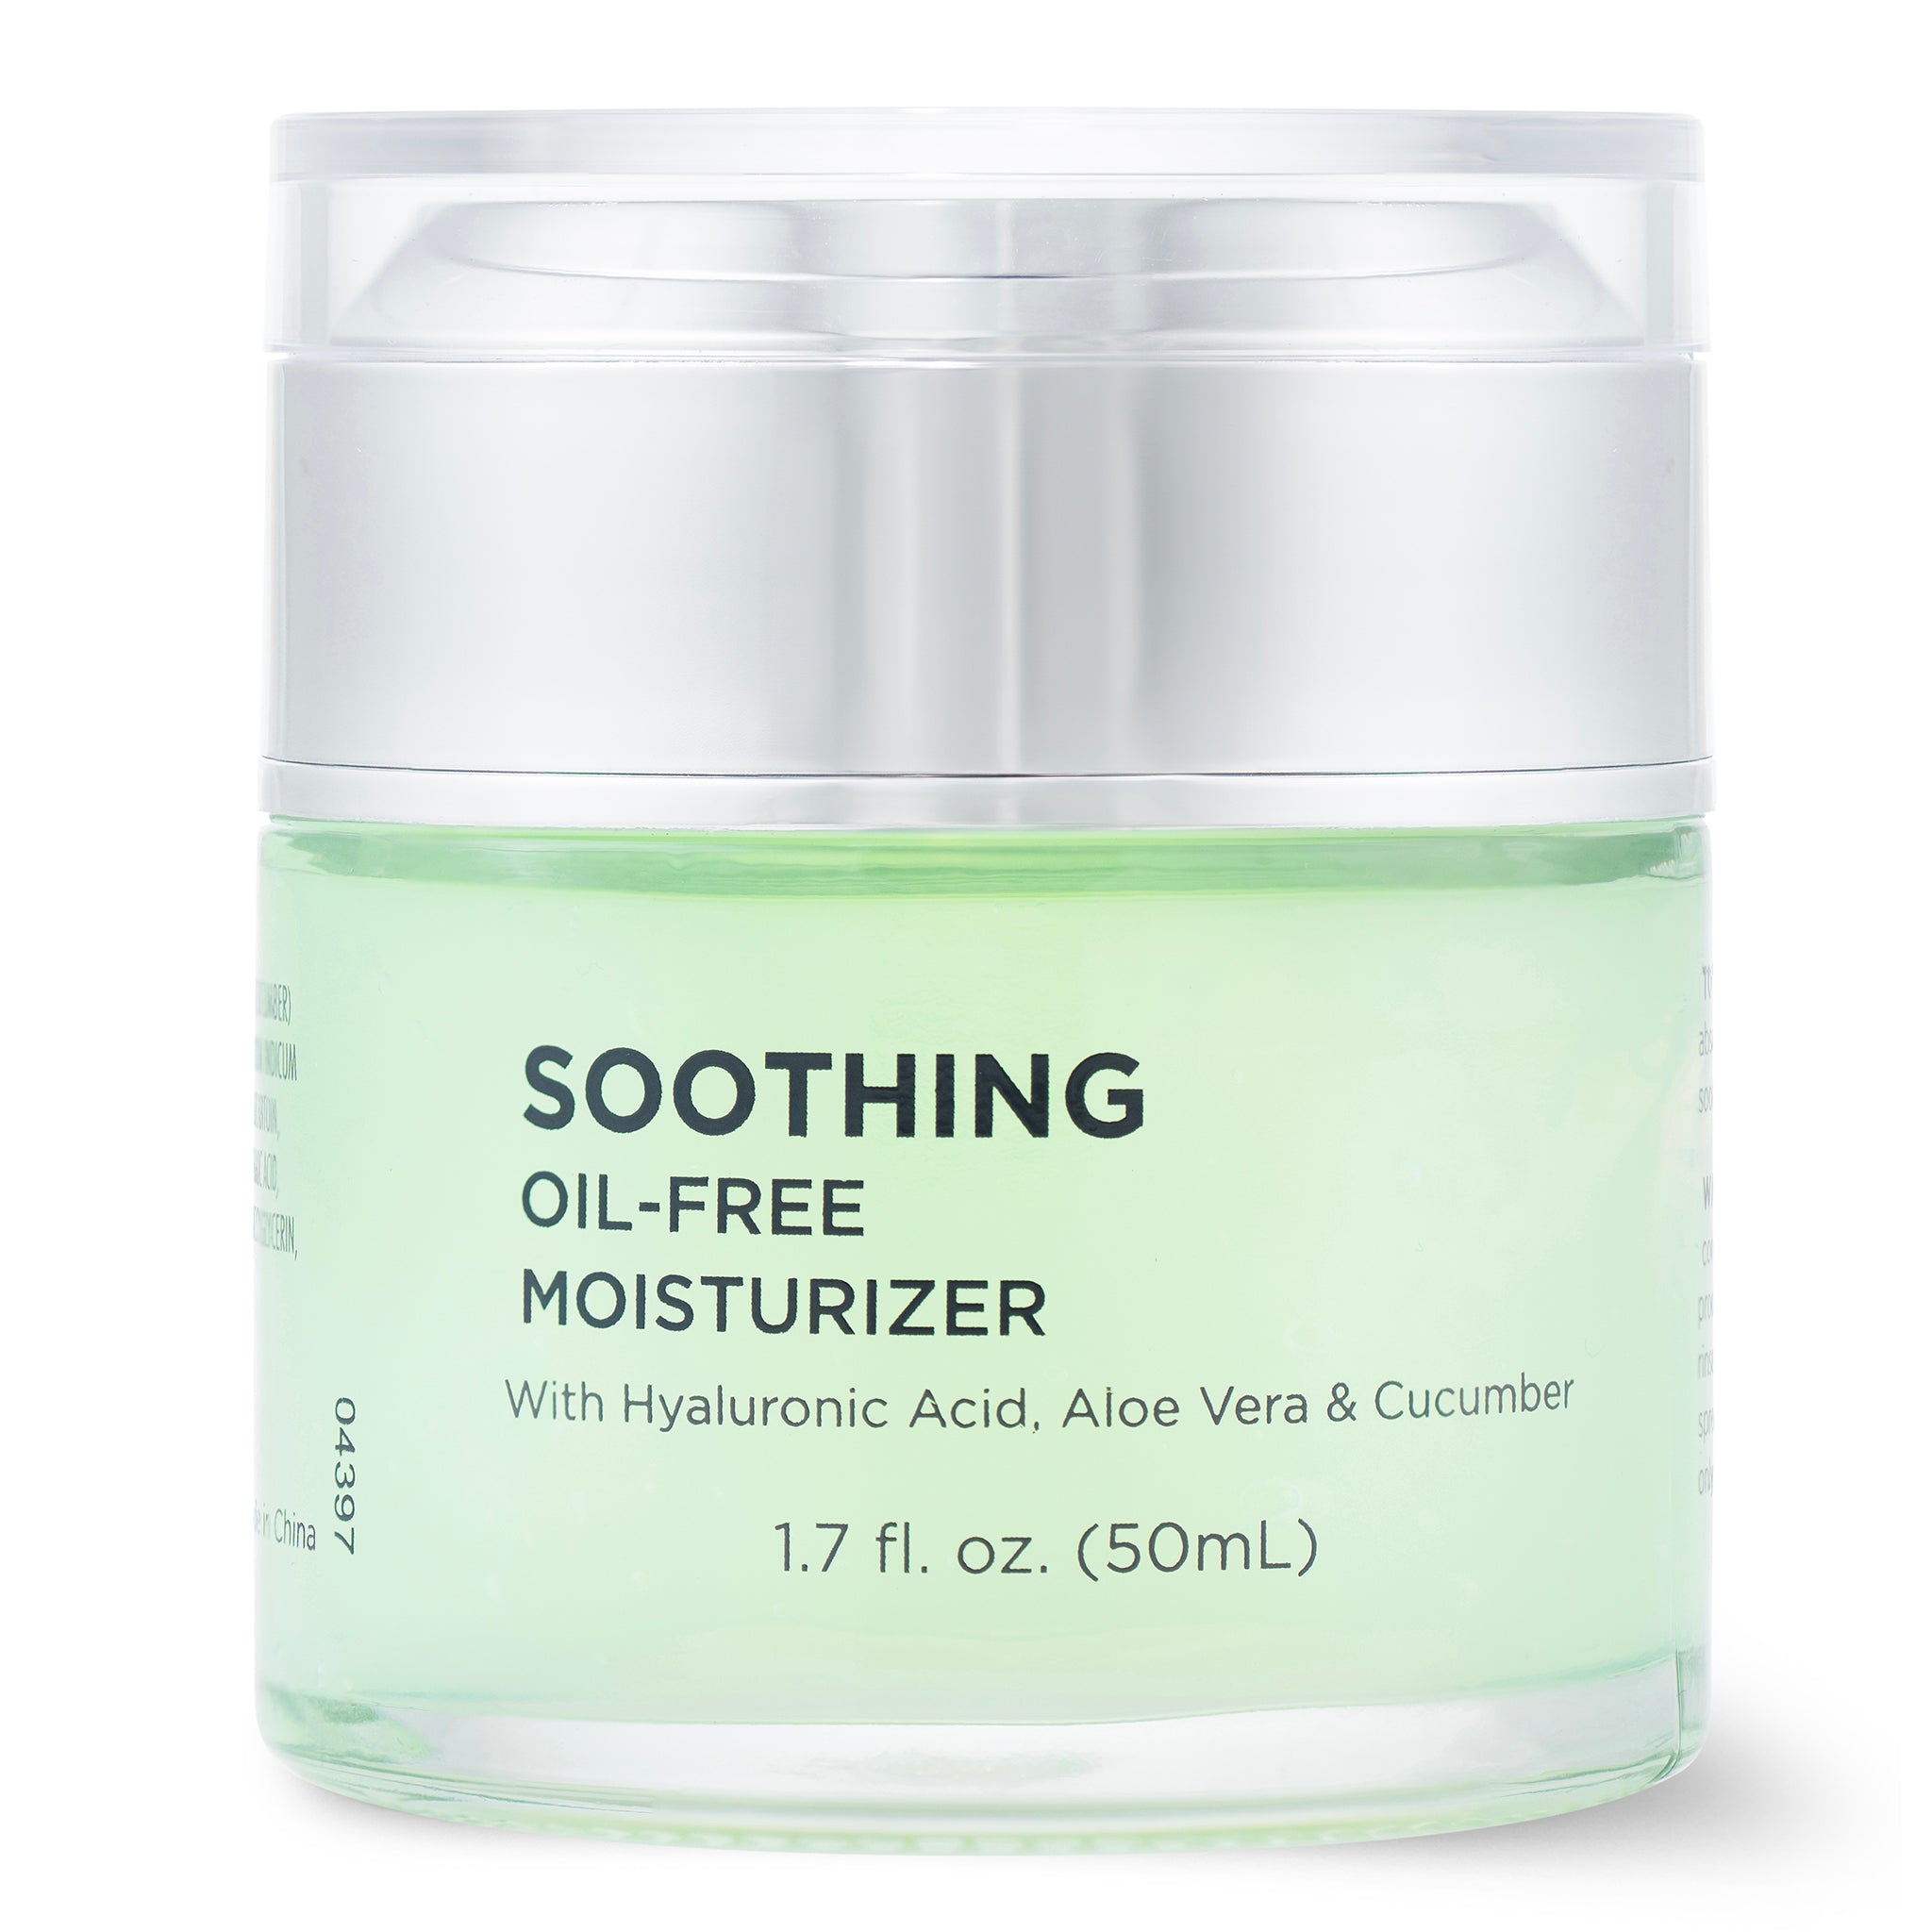 Soothing Oil-Free Moisturizer with Hyaluronic Acid, Aloe Vera & Cucumber Cooling Gel